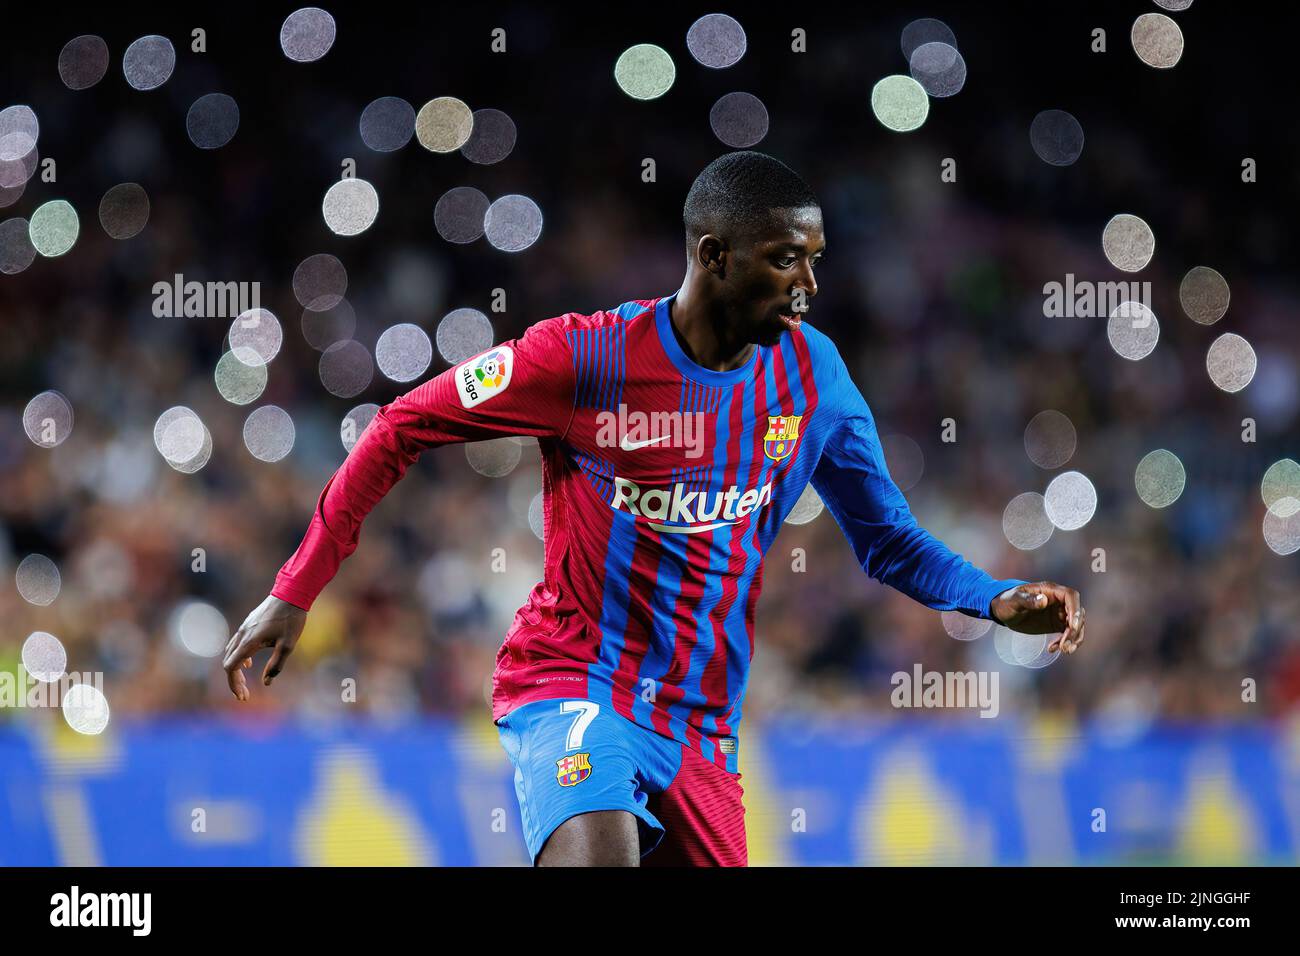 BARCELONA - MAY 10: Dembele in action during the La Liga match between FC Barcelona and Real Club Celta de Vigo at the Camp Nou Stadium on May 10, 202 Stock Photo